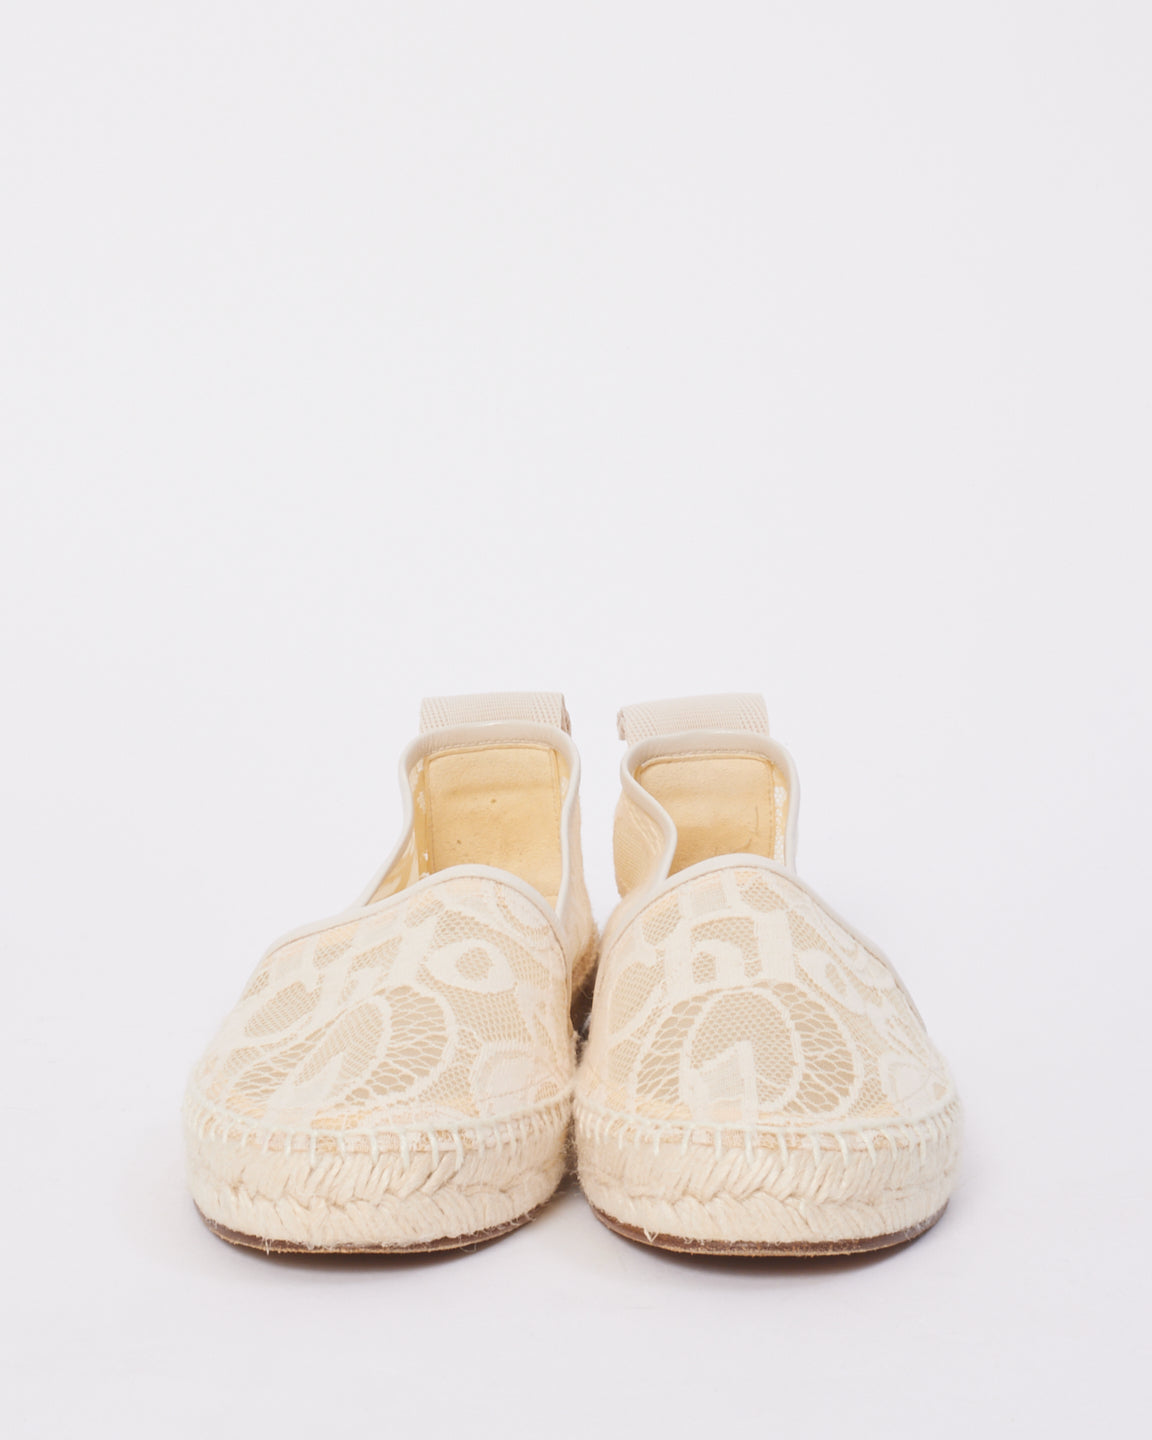 Chloé White Lace Woody Espadrille Shoes - 37